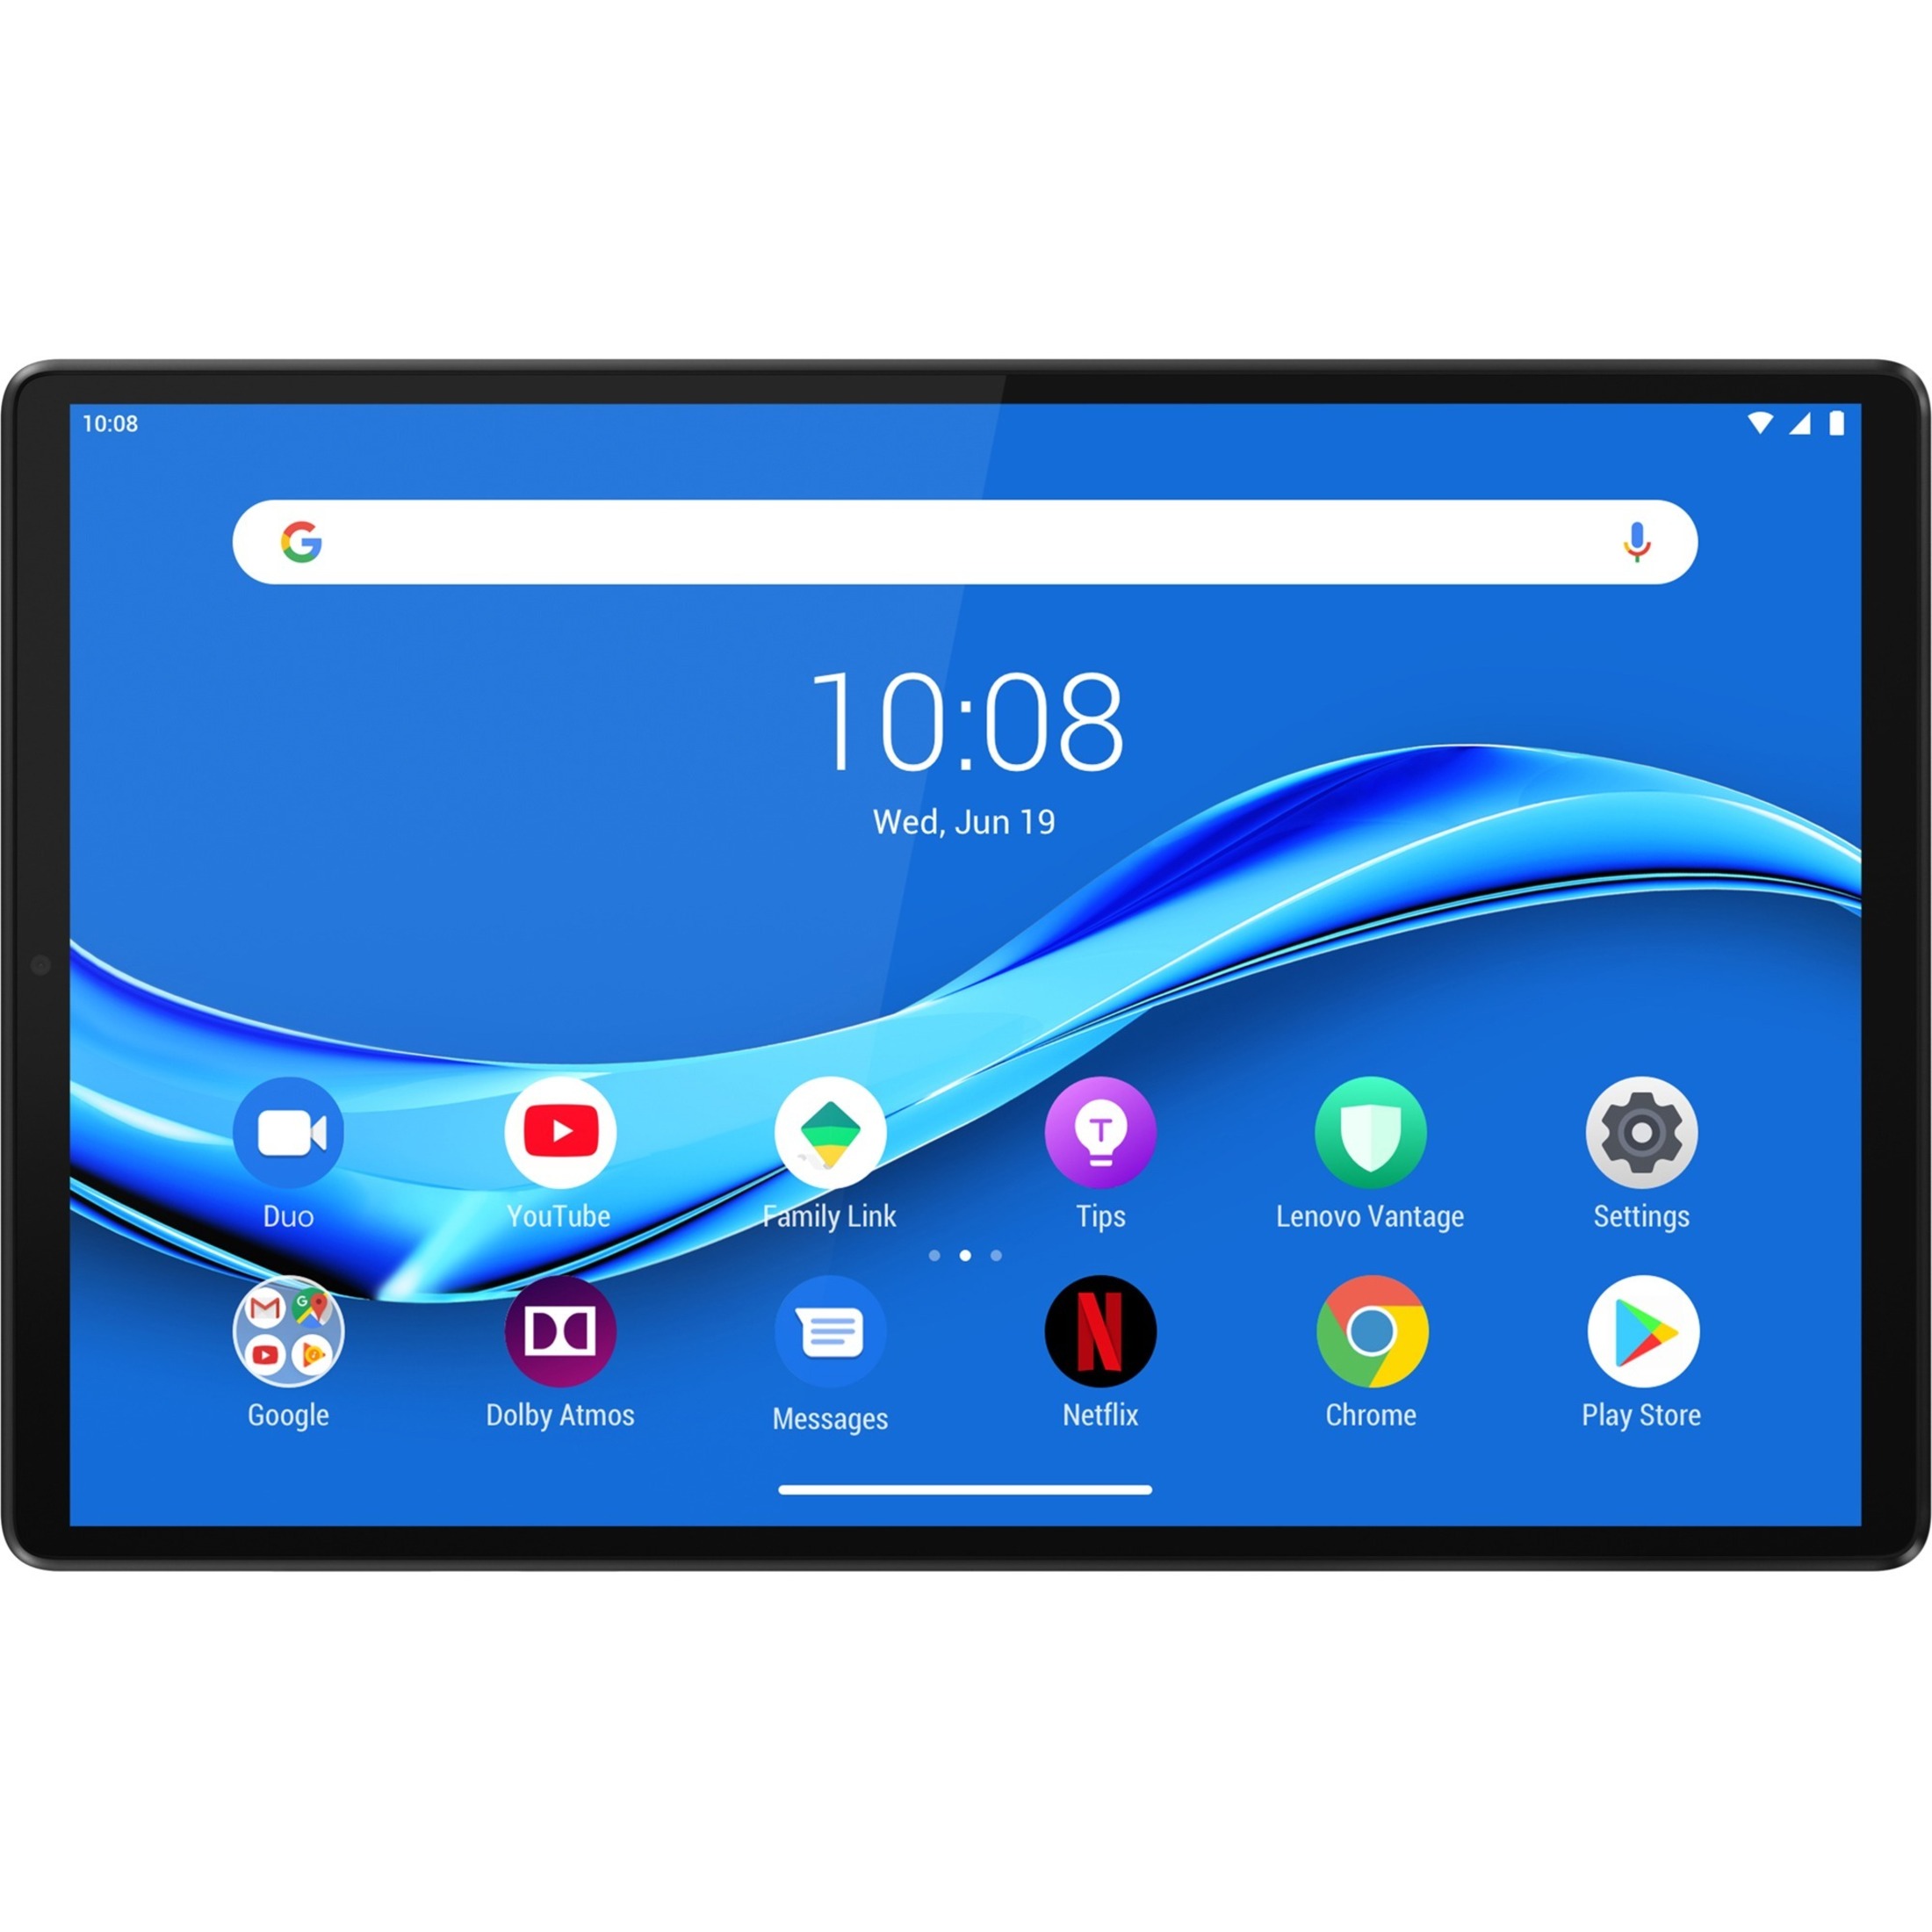 Lenovo Tab M10 10.3" Tablet - MediaTek Helio P22T - 4GB - 64GB FHD Plus with the Smart Charging Station - Android 9.0 (Pie) - image 20 of 33